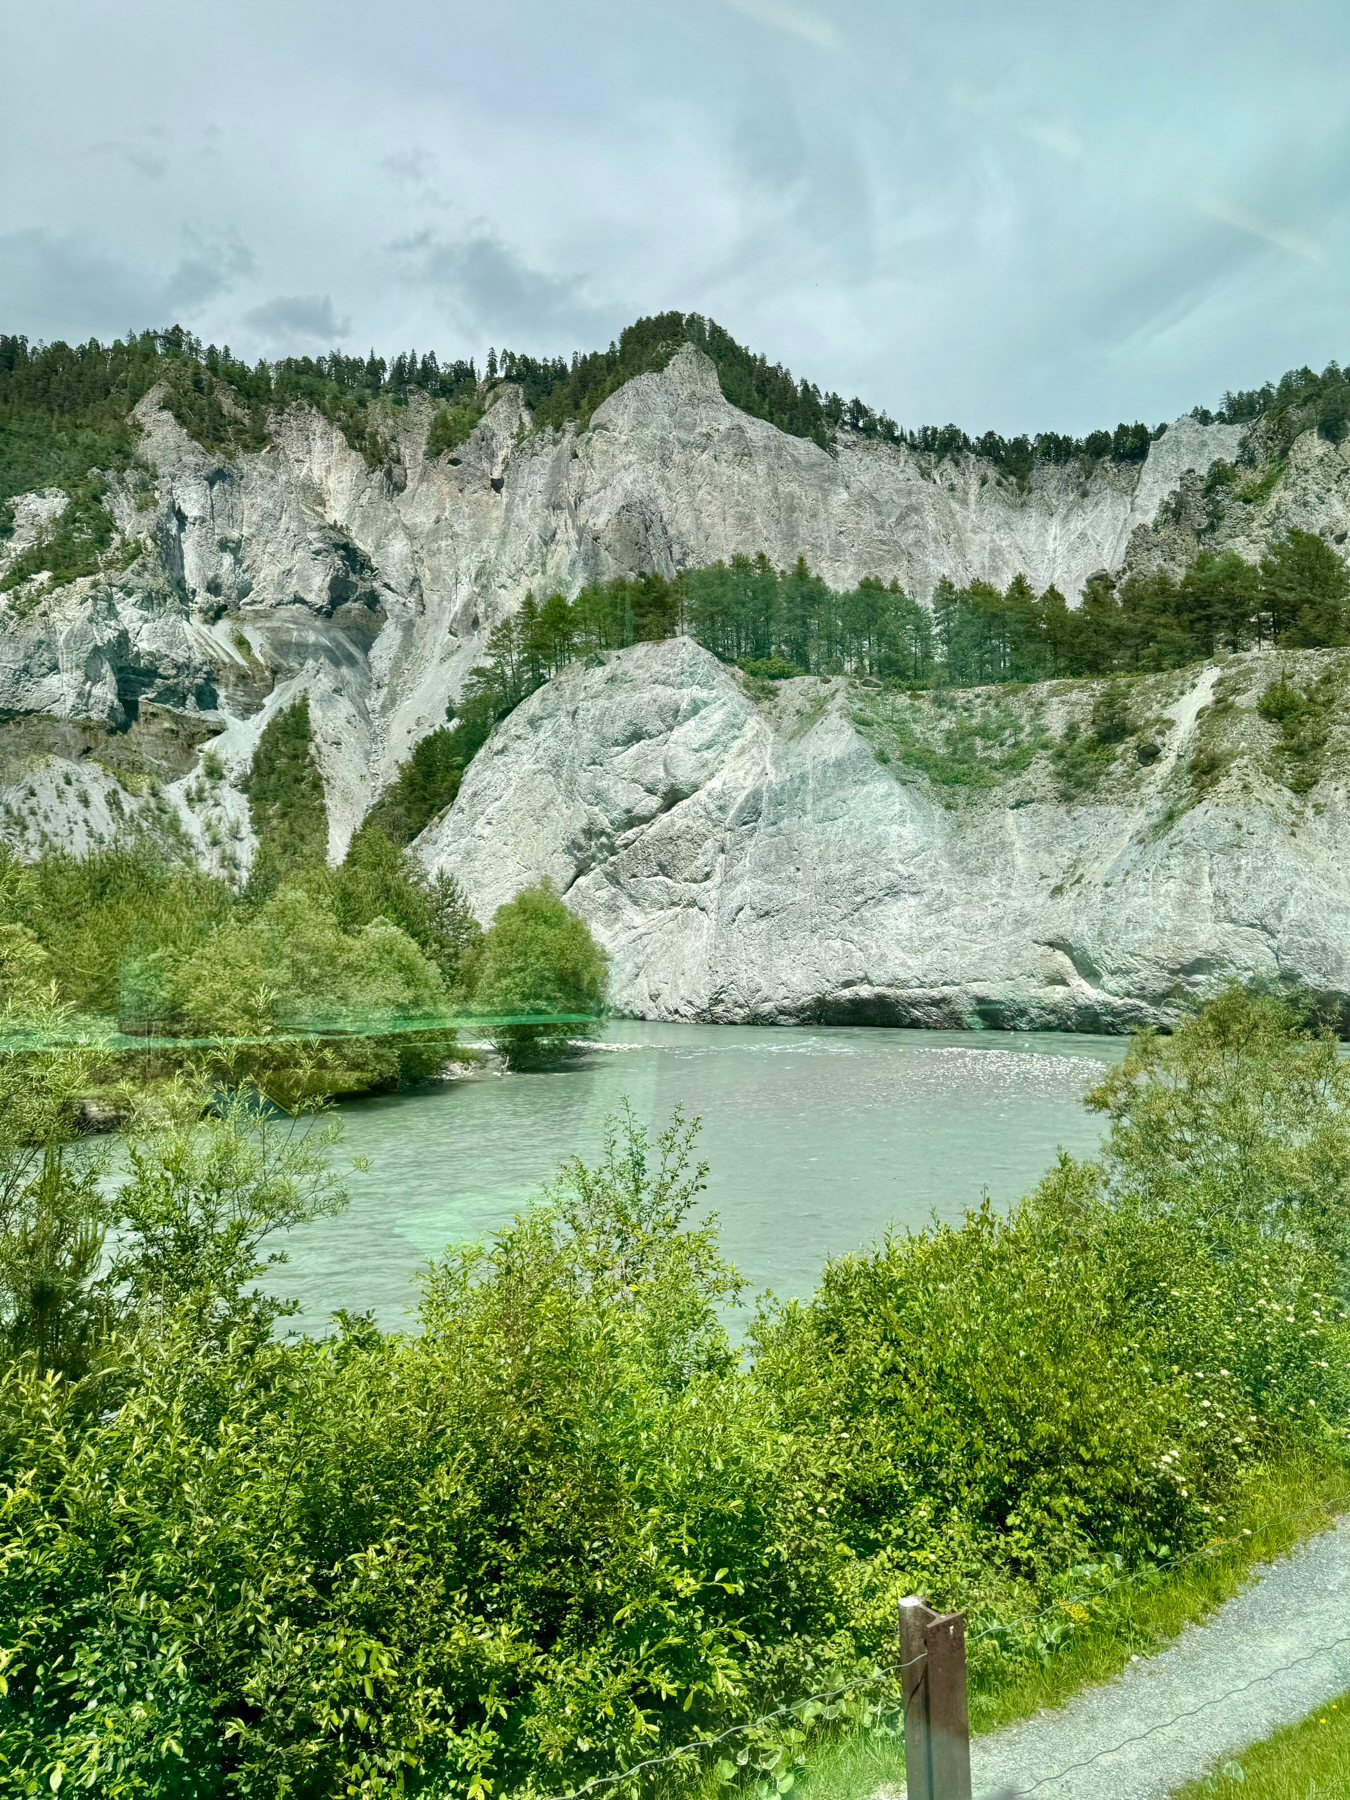 A serene landscape featuring a turquoise river in the foreground with lush greenery on its banks and dramatic, rocky mountains in the background, all under a slightly cloudy sky.